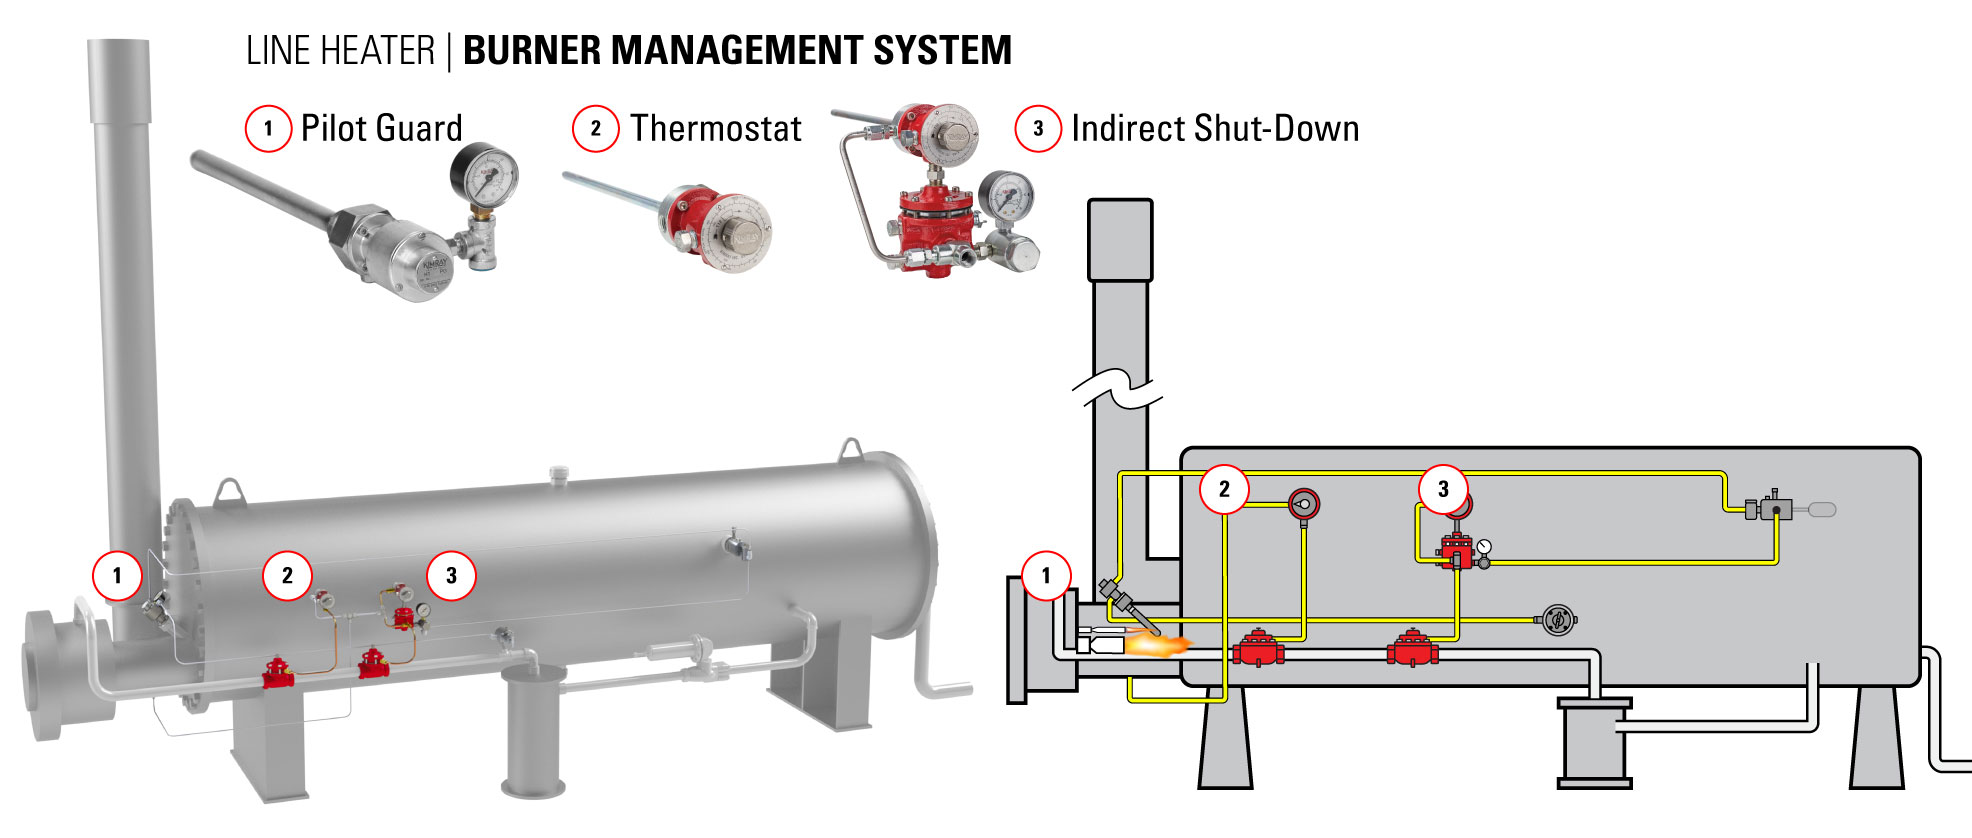 line heater illustration and rendering with kimray products pilot guard thermostat and indirect shut-down